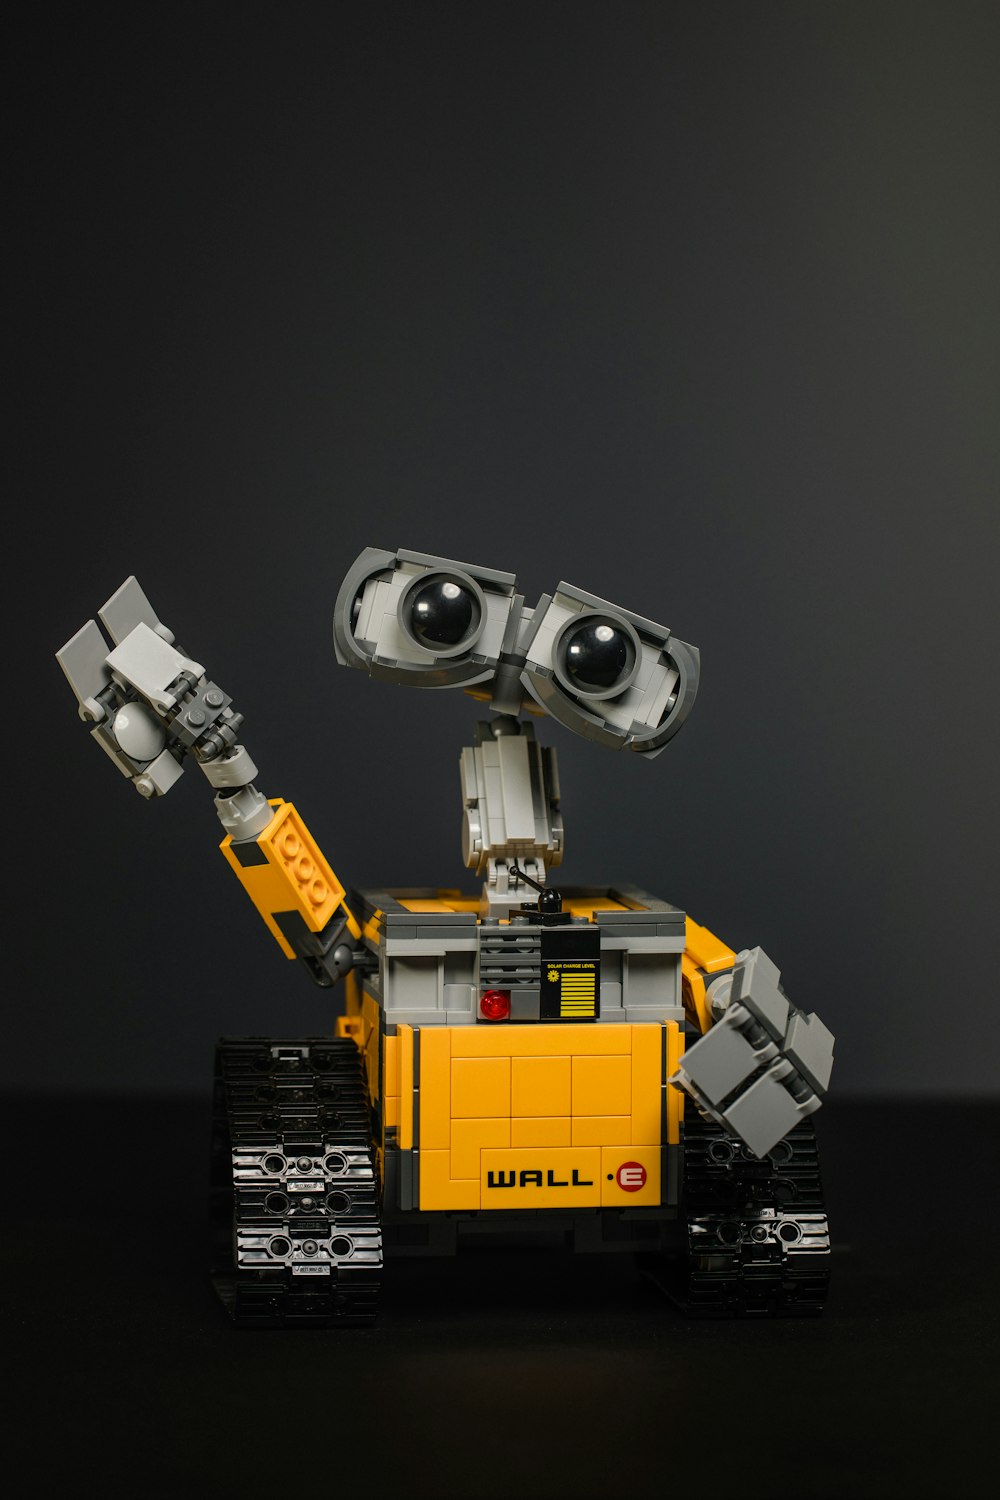 yellow and gray robot toy